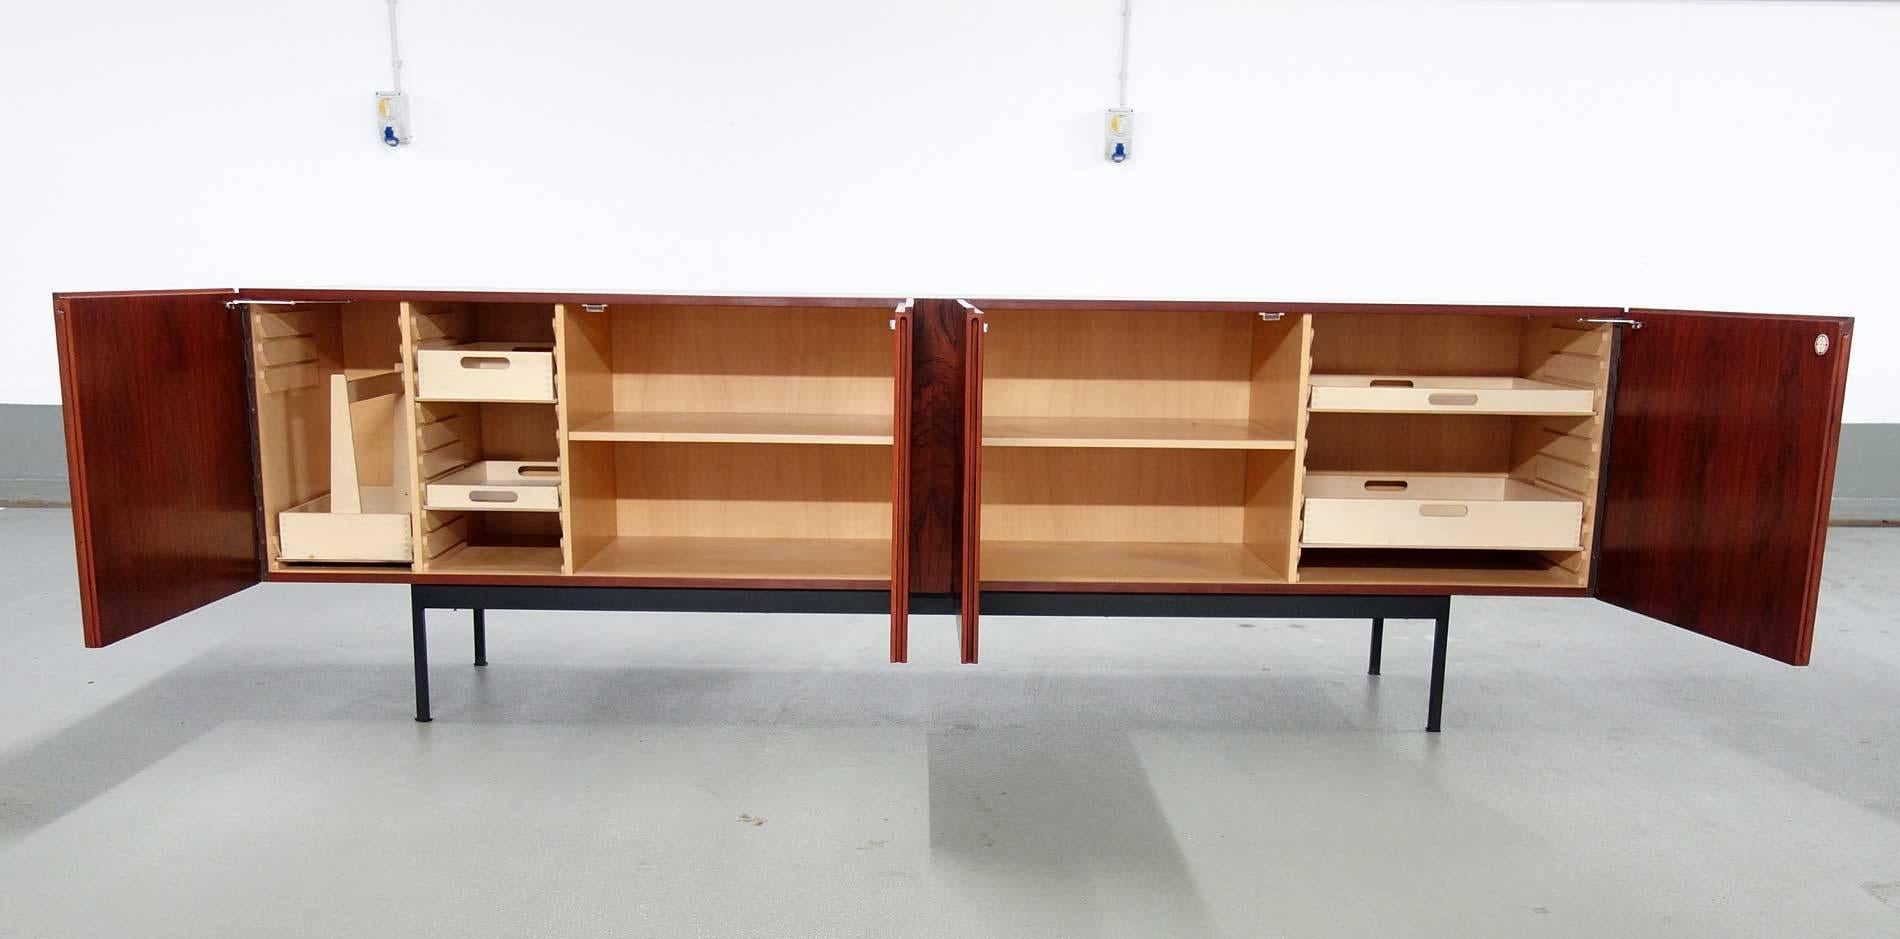 Mid-Century Modern Sideboard, rosewood exterior, maple interior. Black lacquered iron base.
Design: Dieter Waeckerling 1959,
Producer. Erwin Behr Moebelfabrik, Germany.
Original vintage condition with some traces of use to the edges.
l. 248, d.